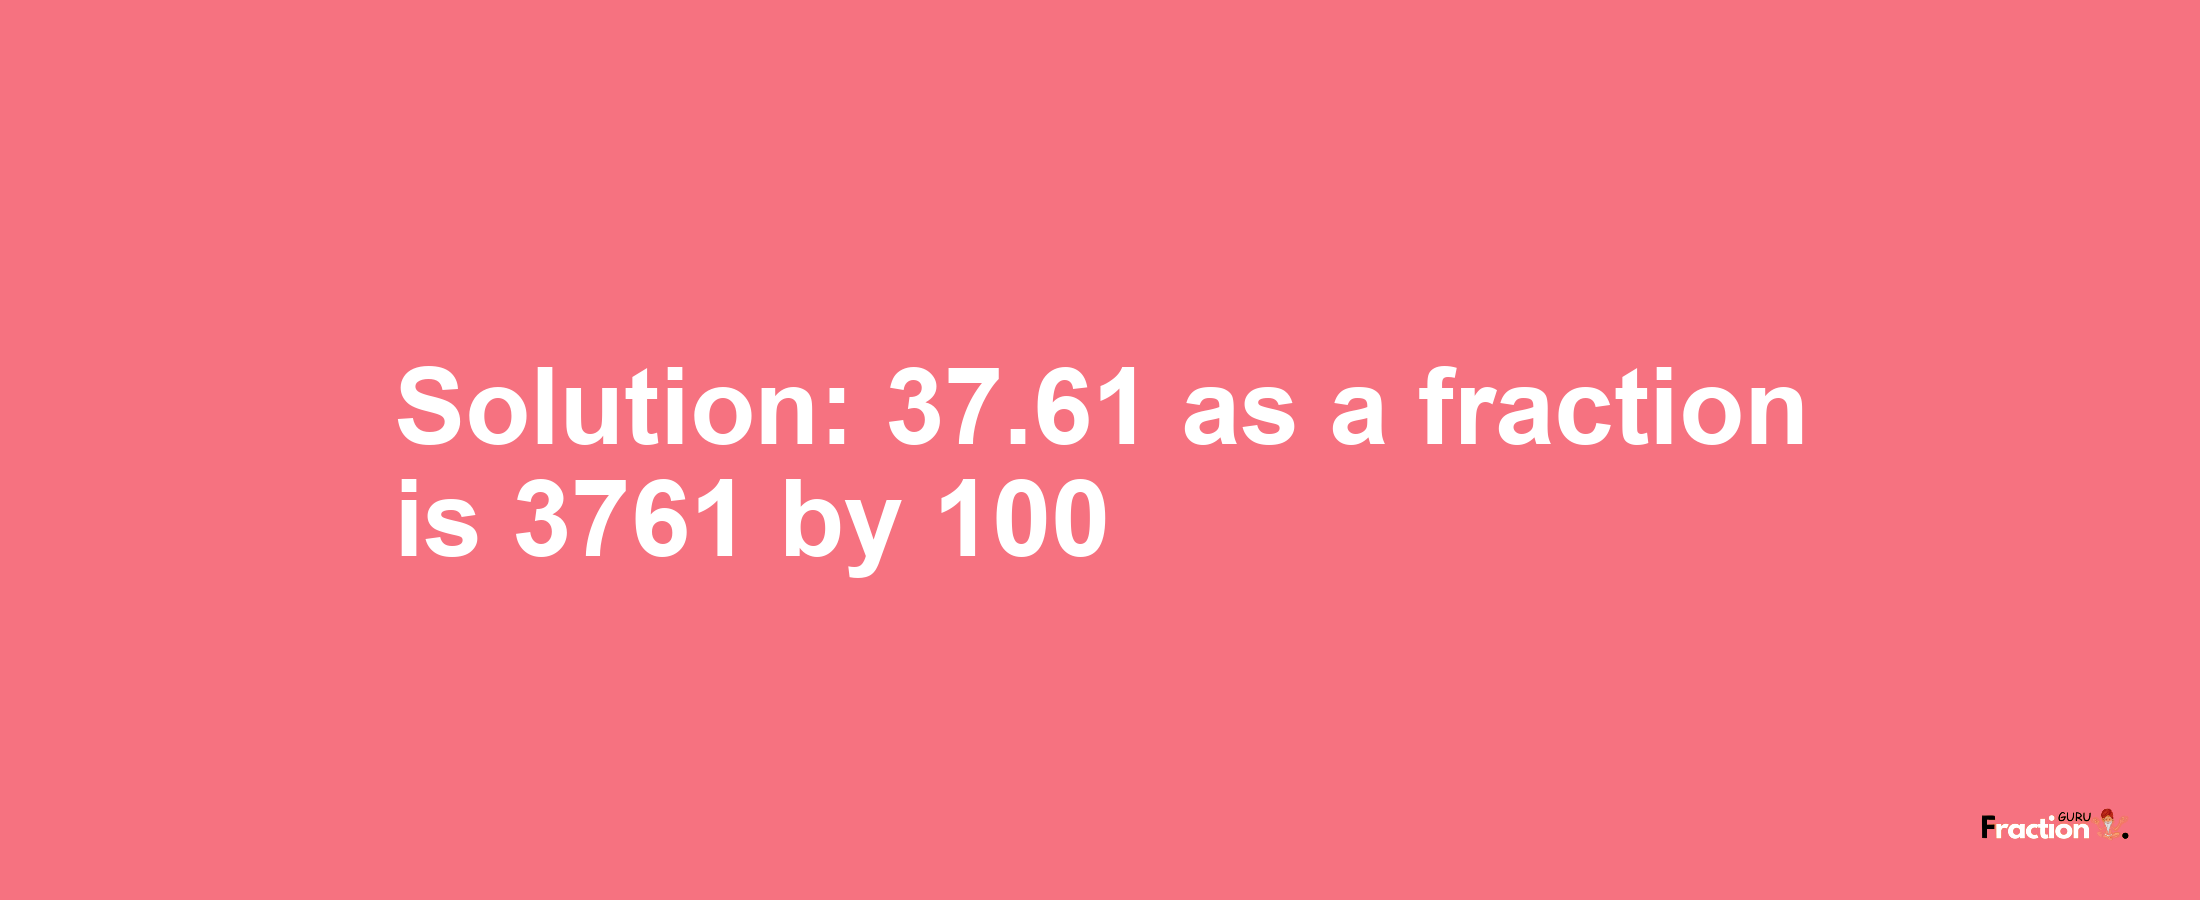 Solution:37.61 as a fraction is 3761/100